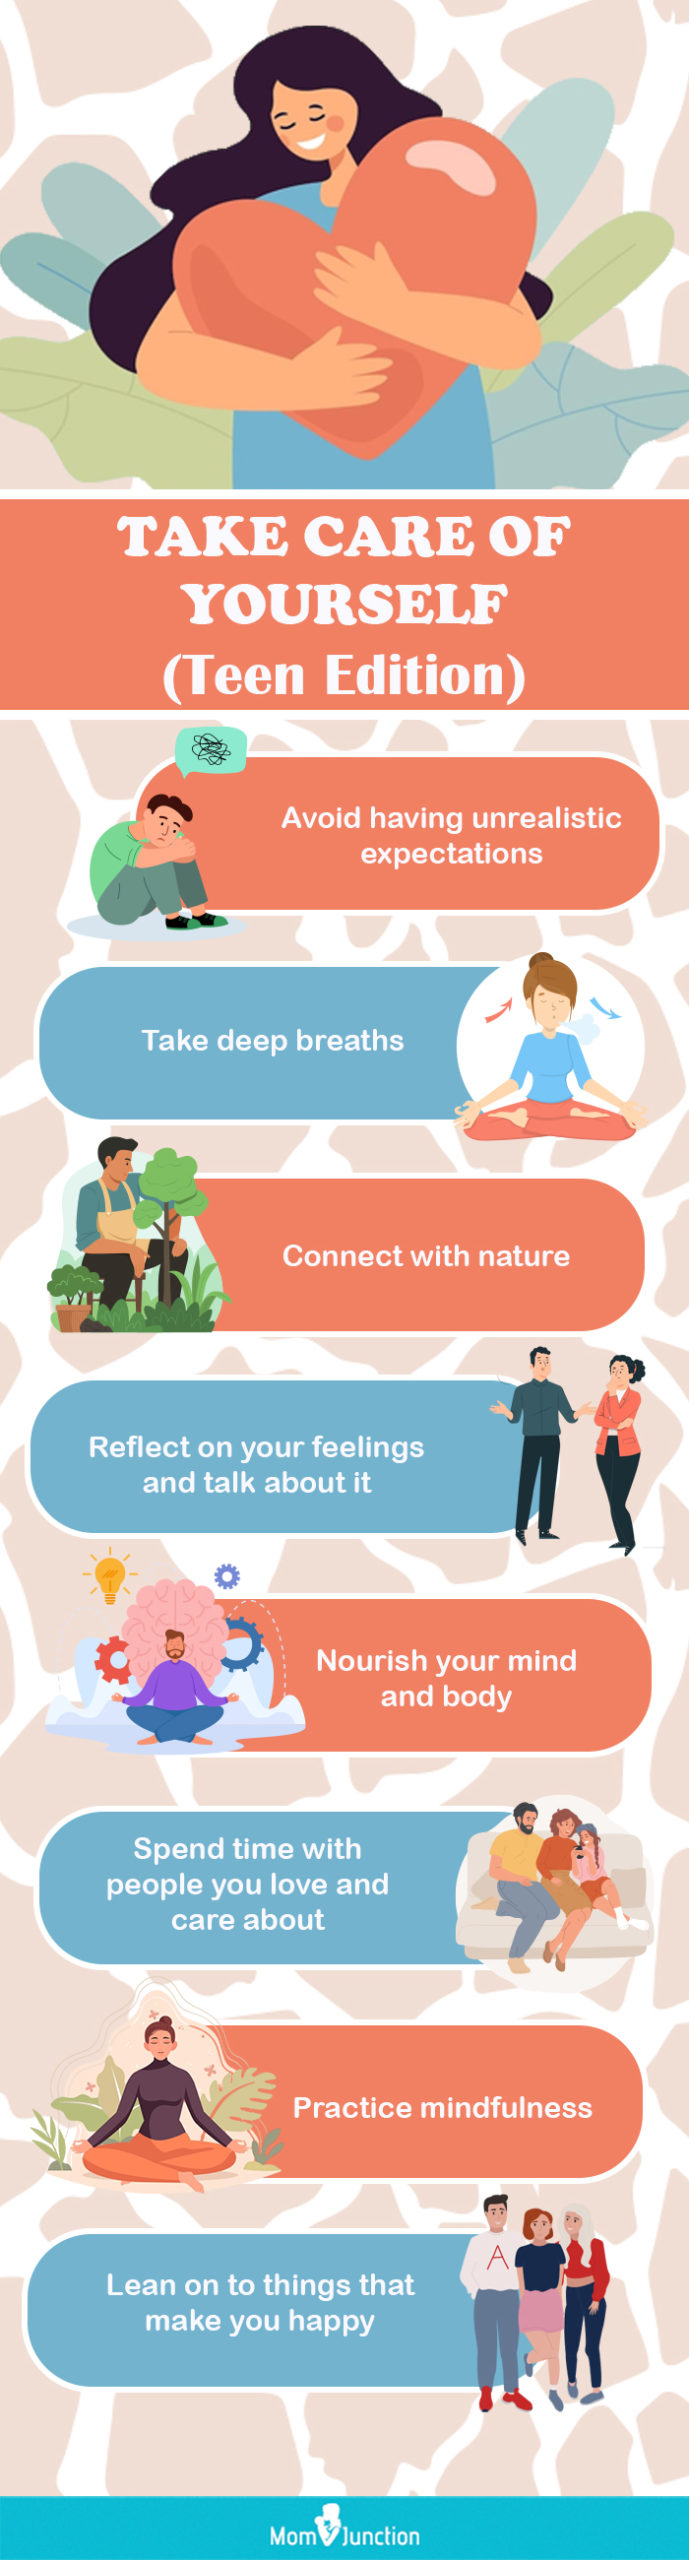 self care for teens (infographic)